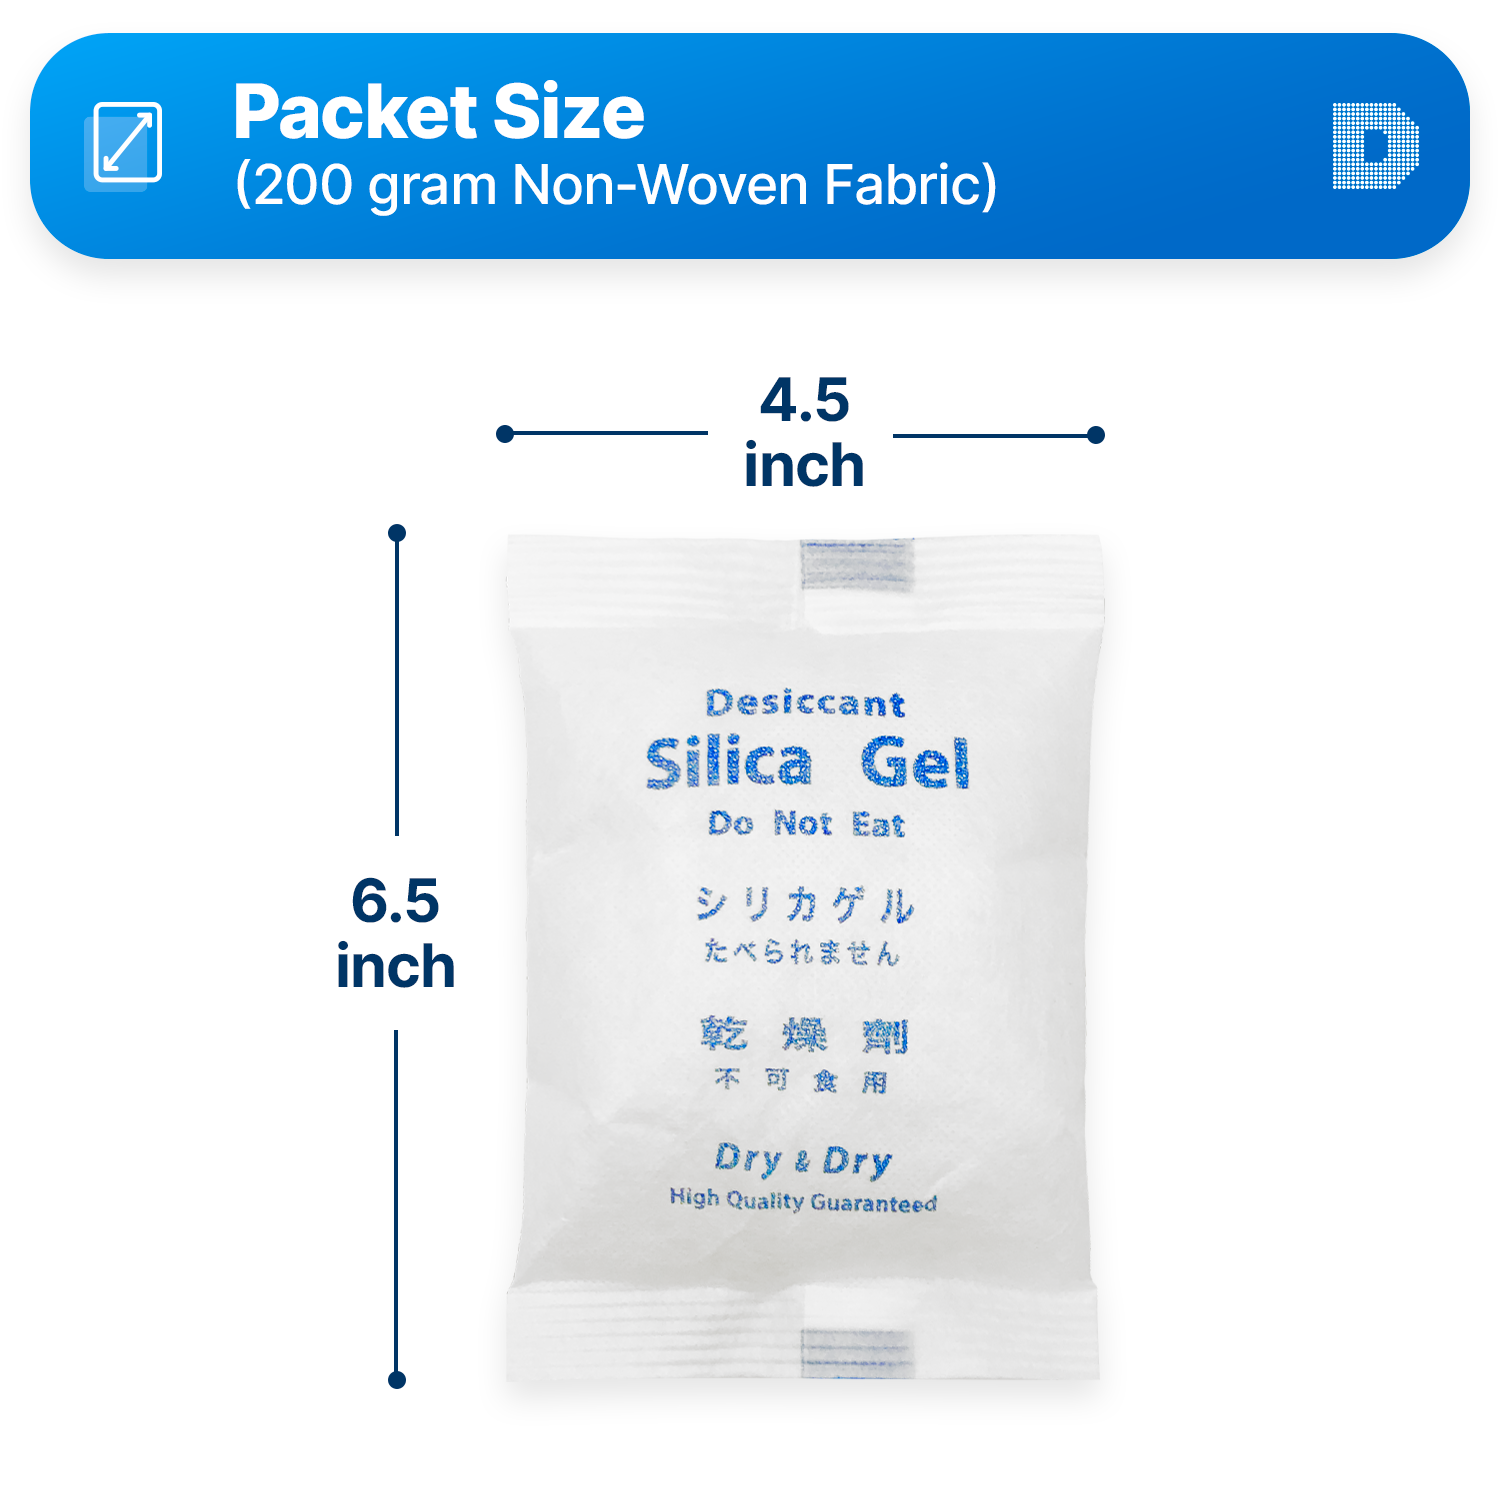 200 Gram [100 Packets]  "Dry & Dry" Premium Silica Gel Desiccant Packets - Rechargeable Non-Woven Fabric (Cloth)